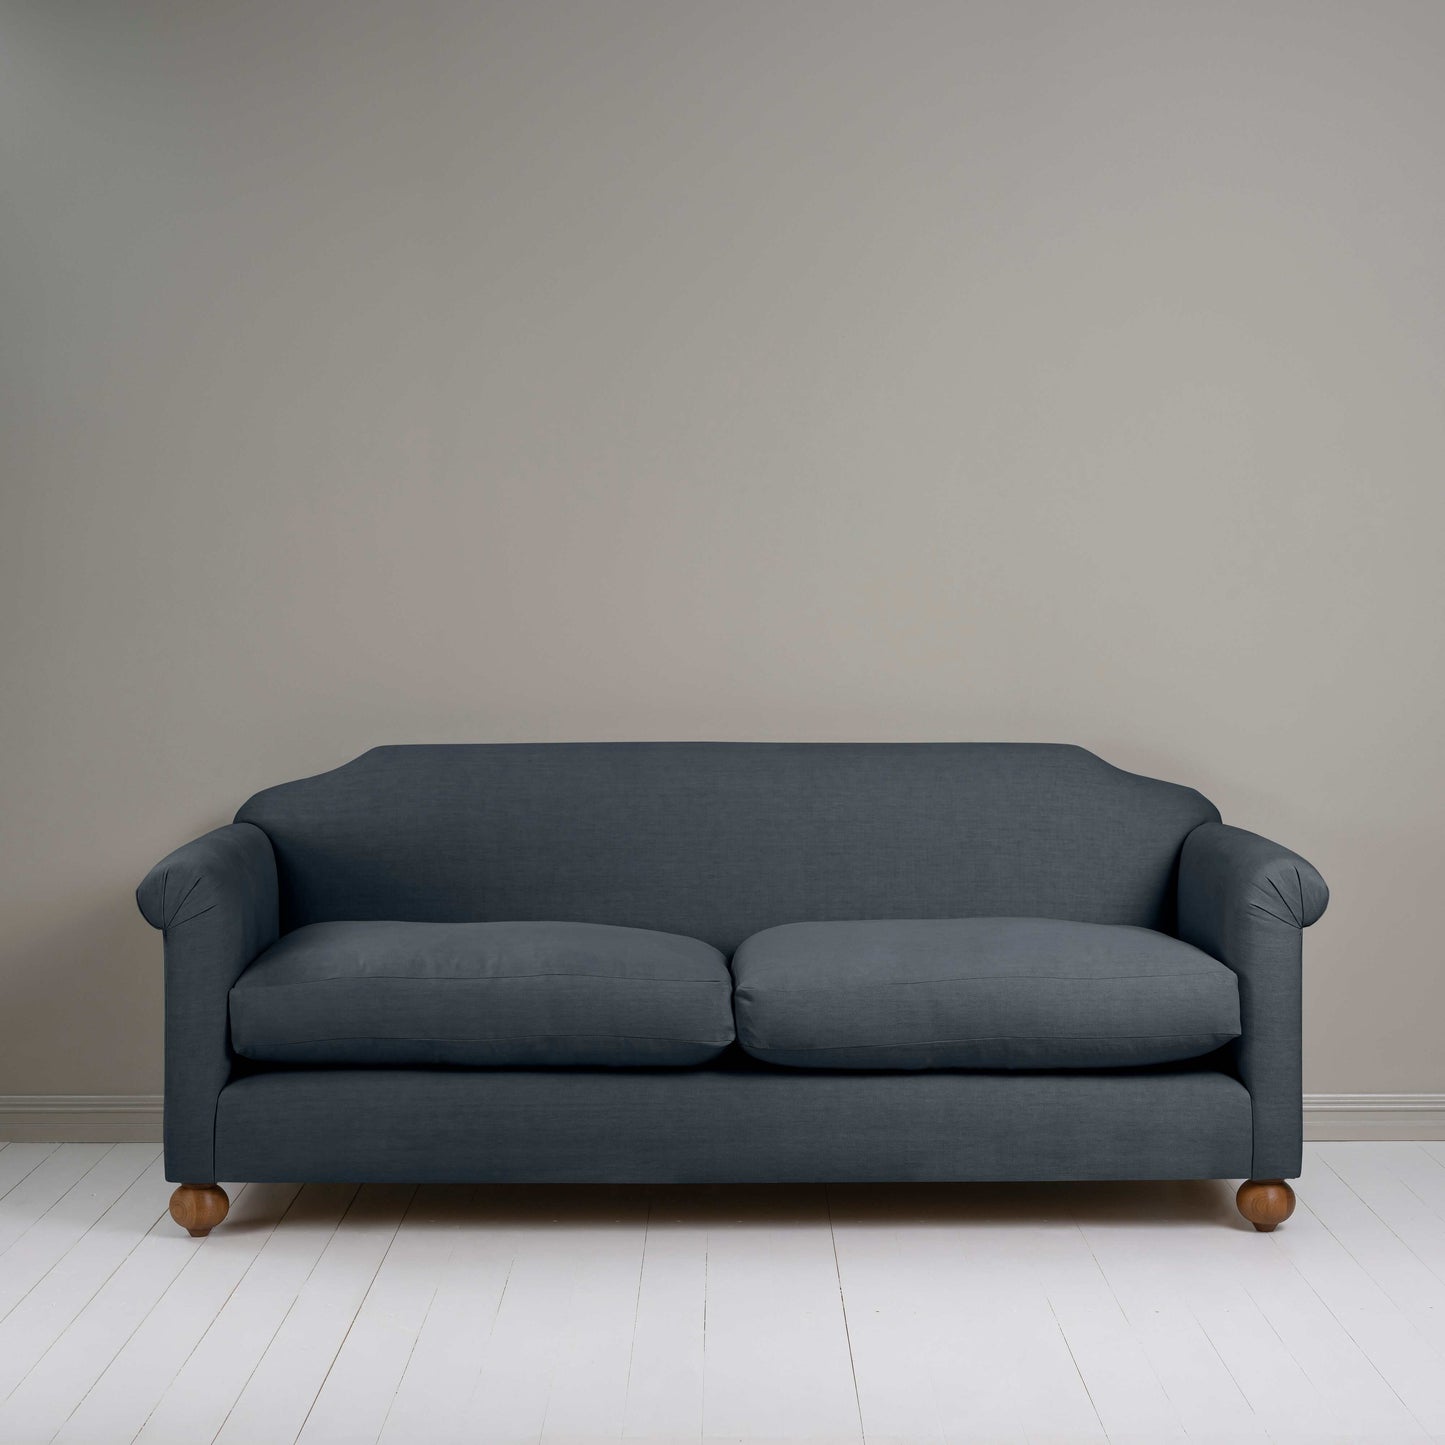 Dolittle 4 seater Sofa in Laidback Linen Midnight